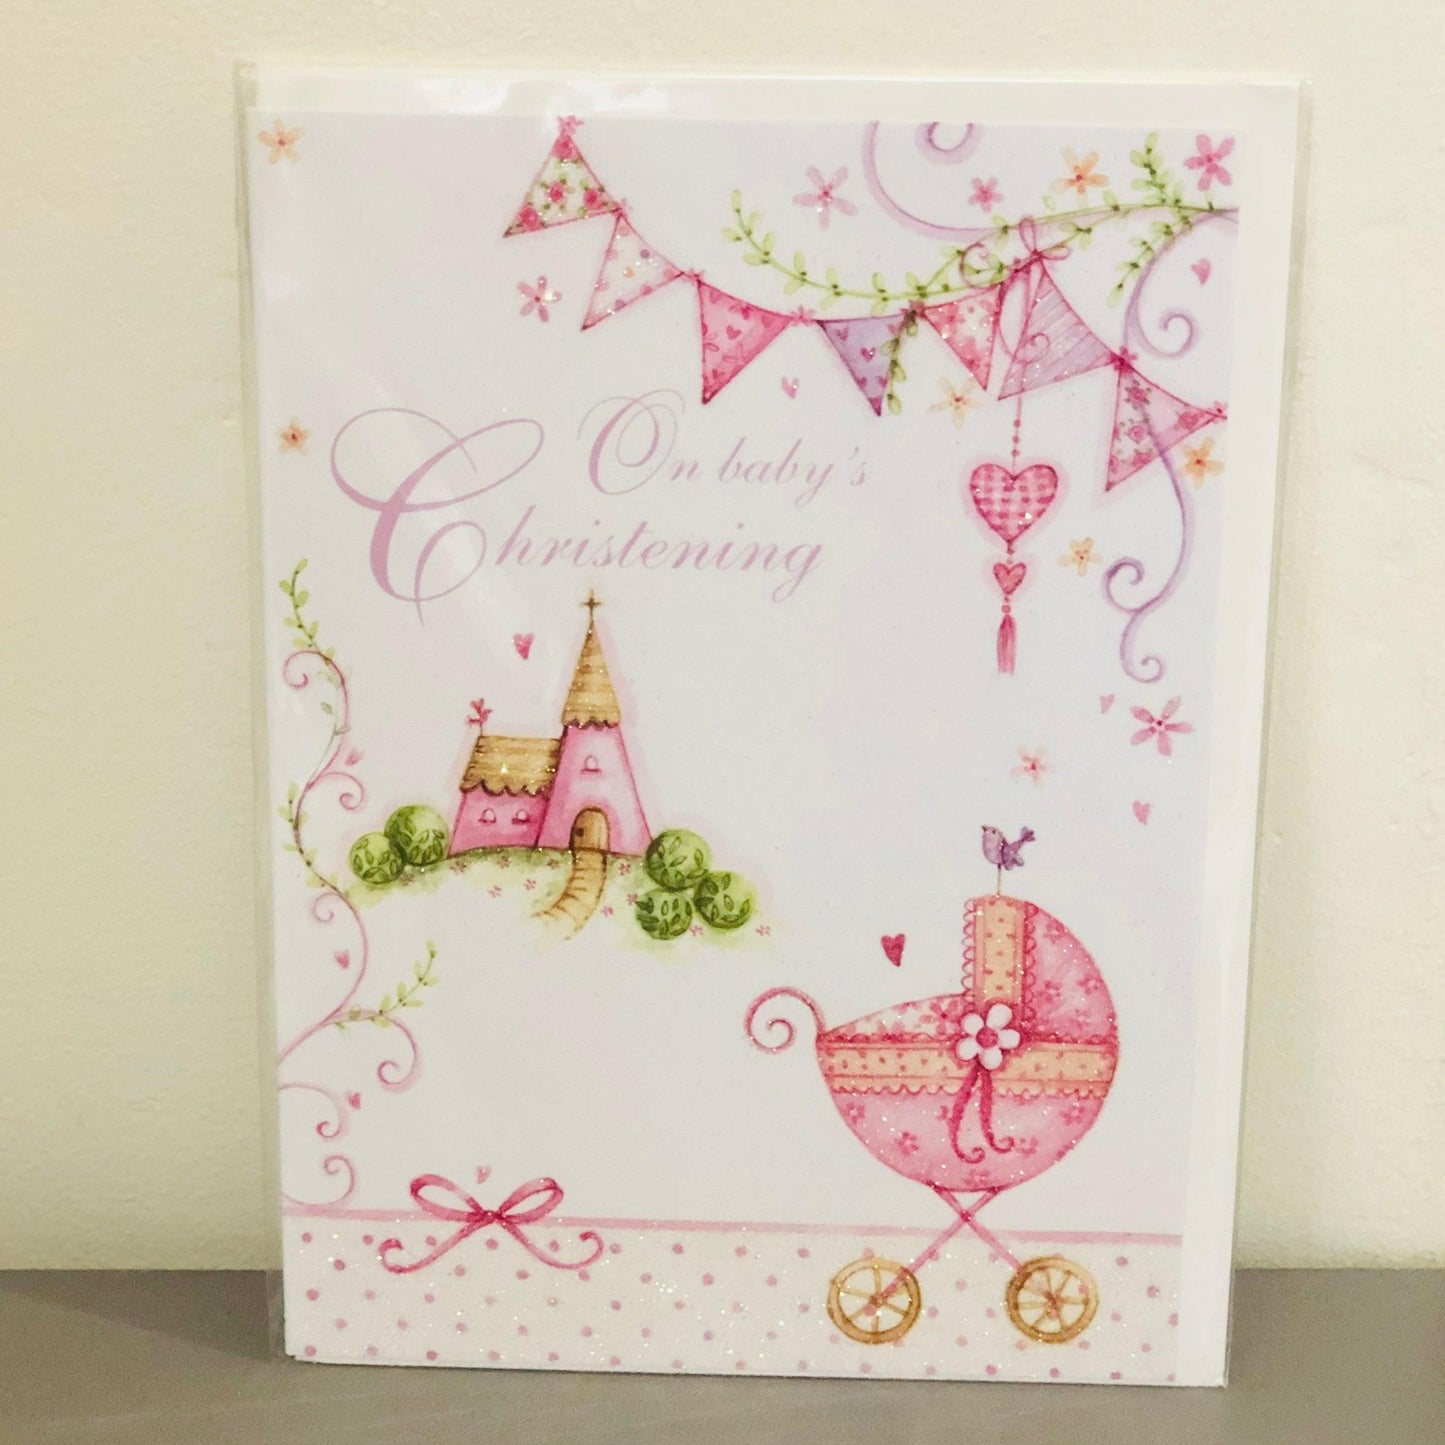 On Baby’s Christening Card | Oscar & Me | Baby & Children’s Clothing & Accessories